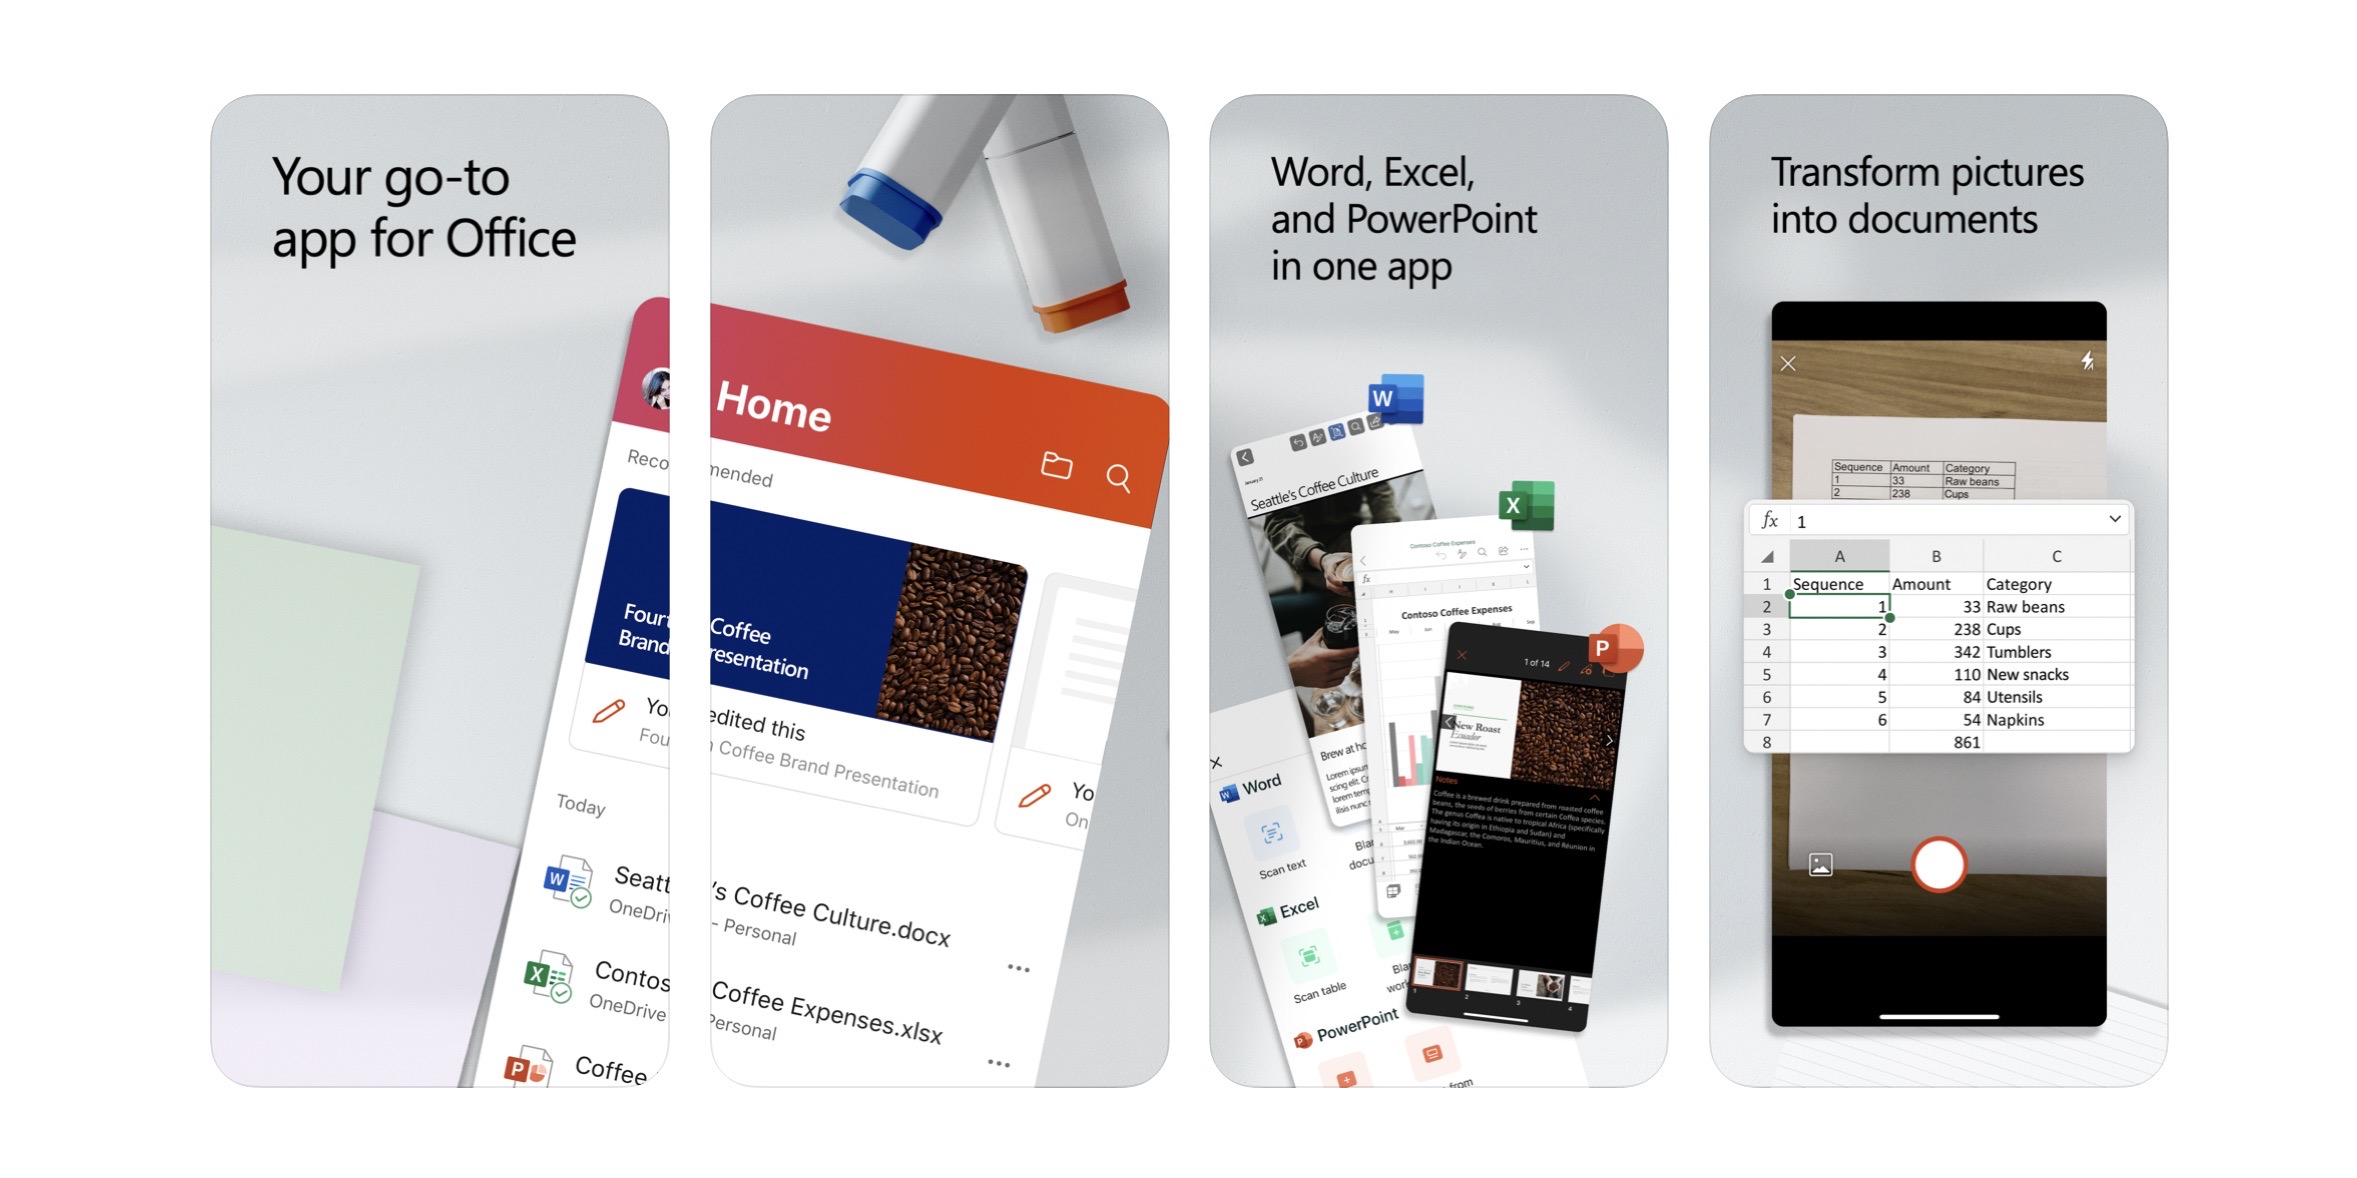 Unified Microsoft Office for iOS app exits beta with Word, Excel,  PowerPoint - 9to5Mac